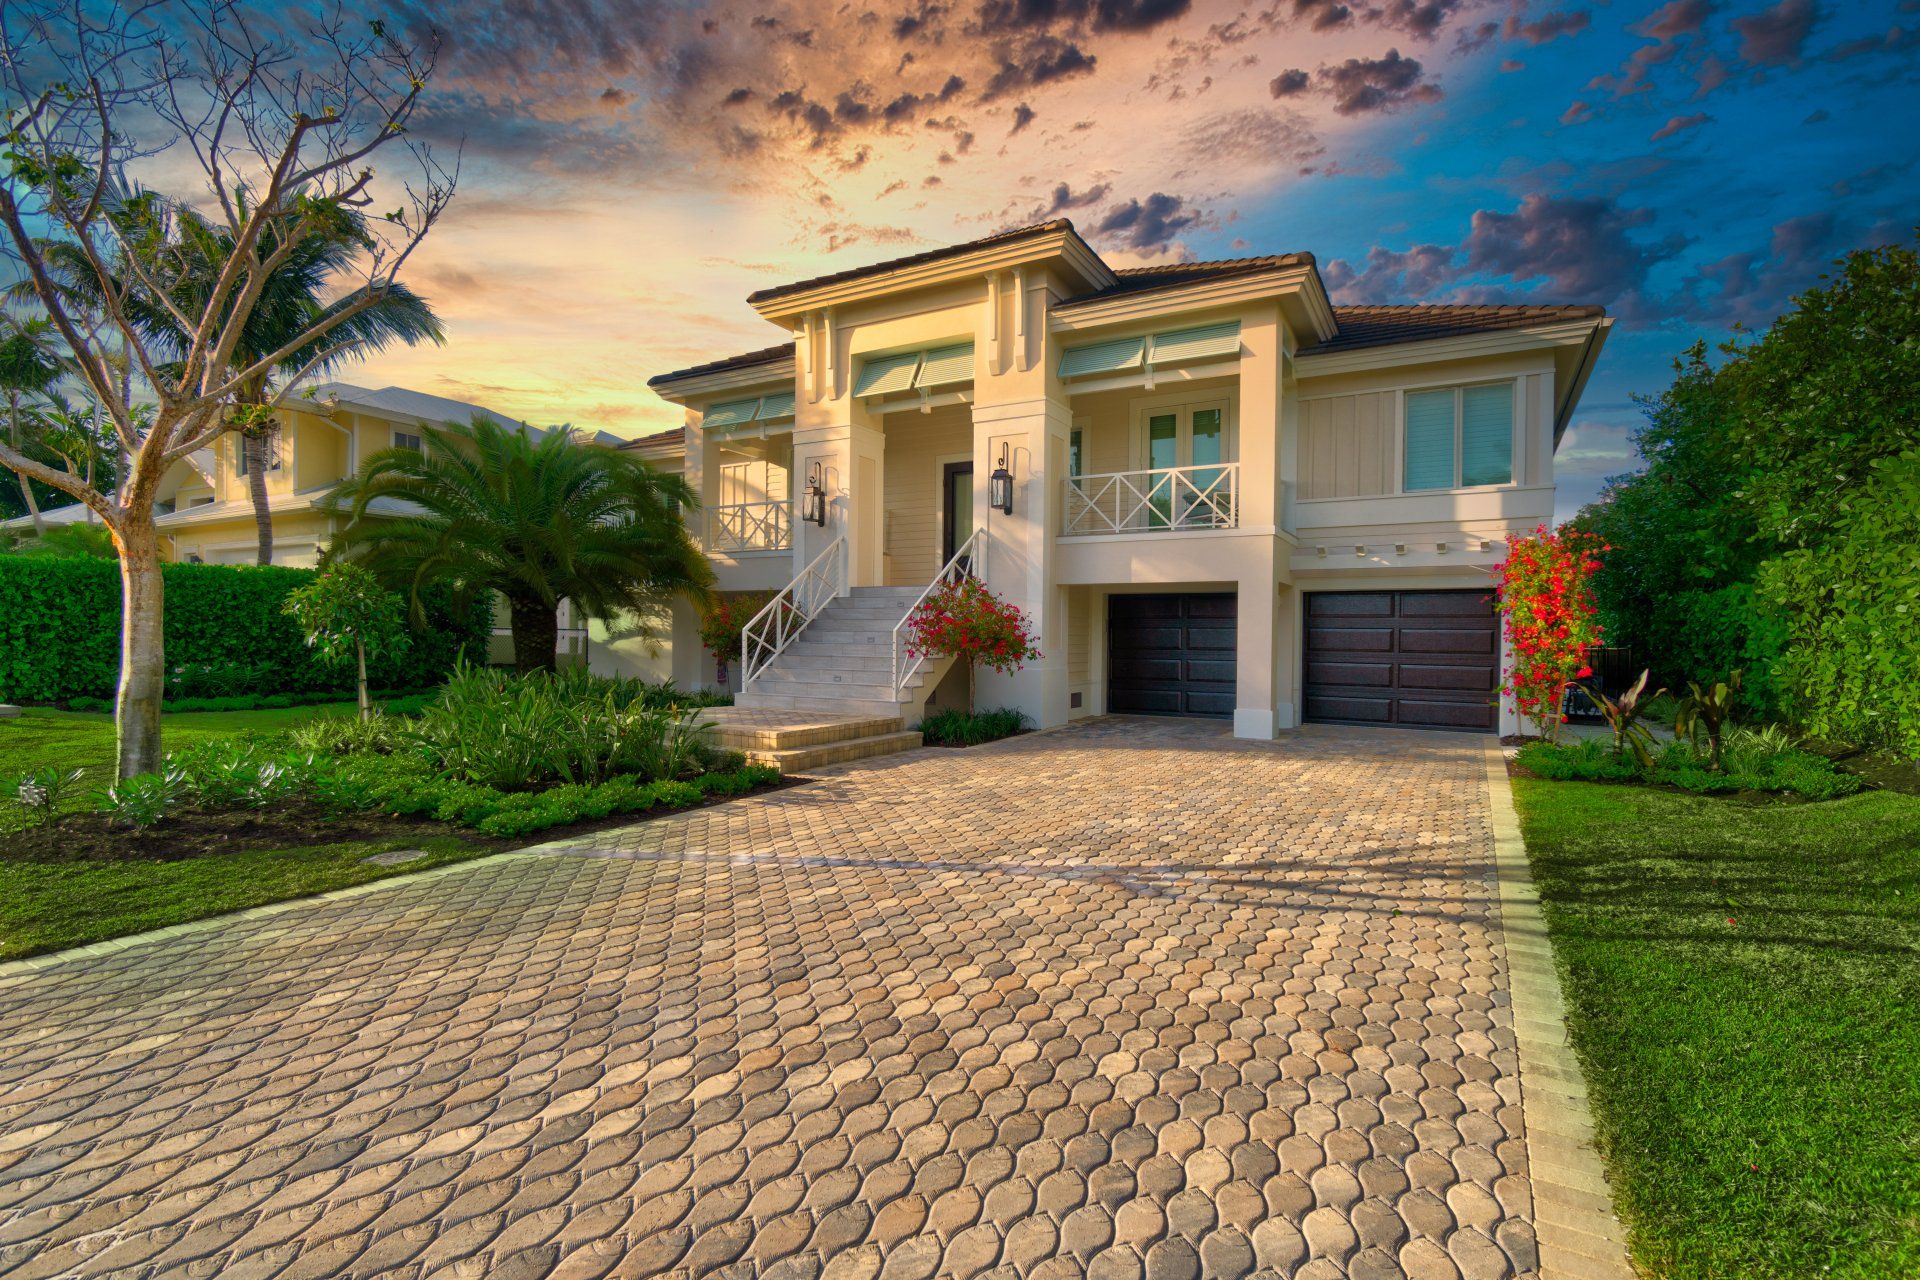 Beautiful new home with big front porch - Naples, FL - Naples Premier Home Watch, LLC